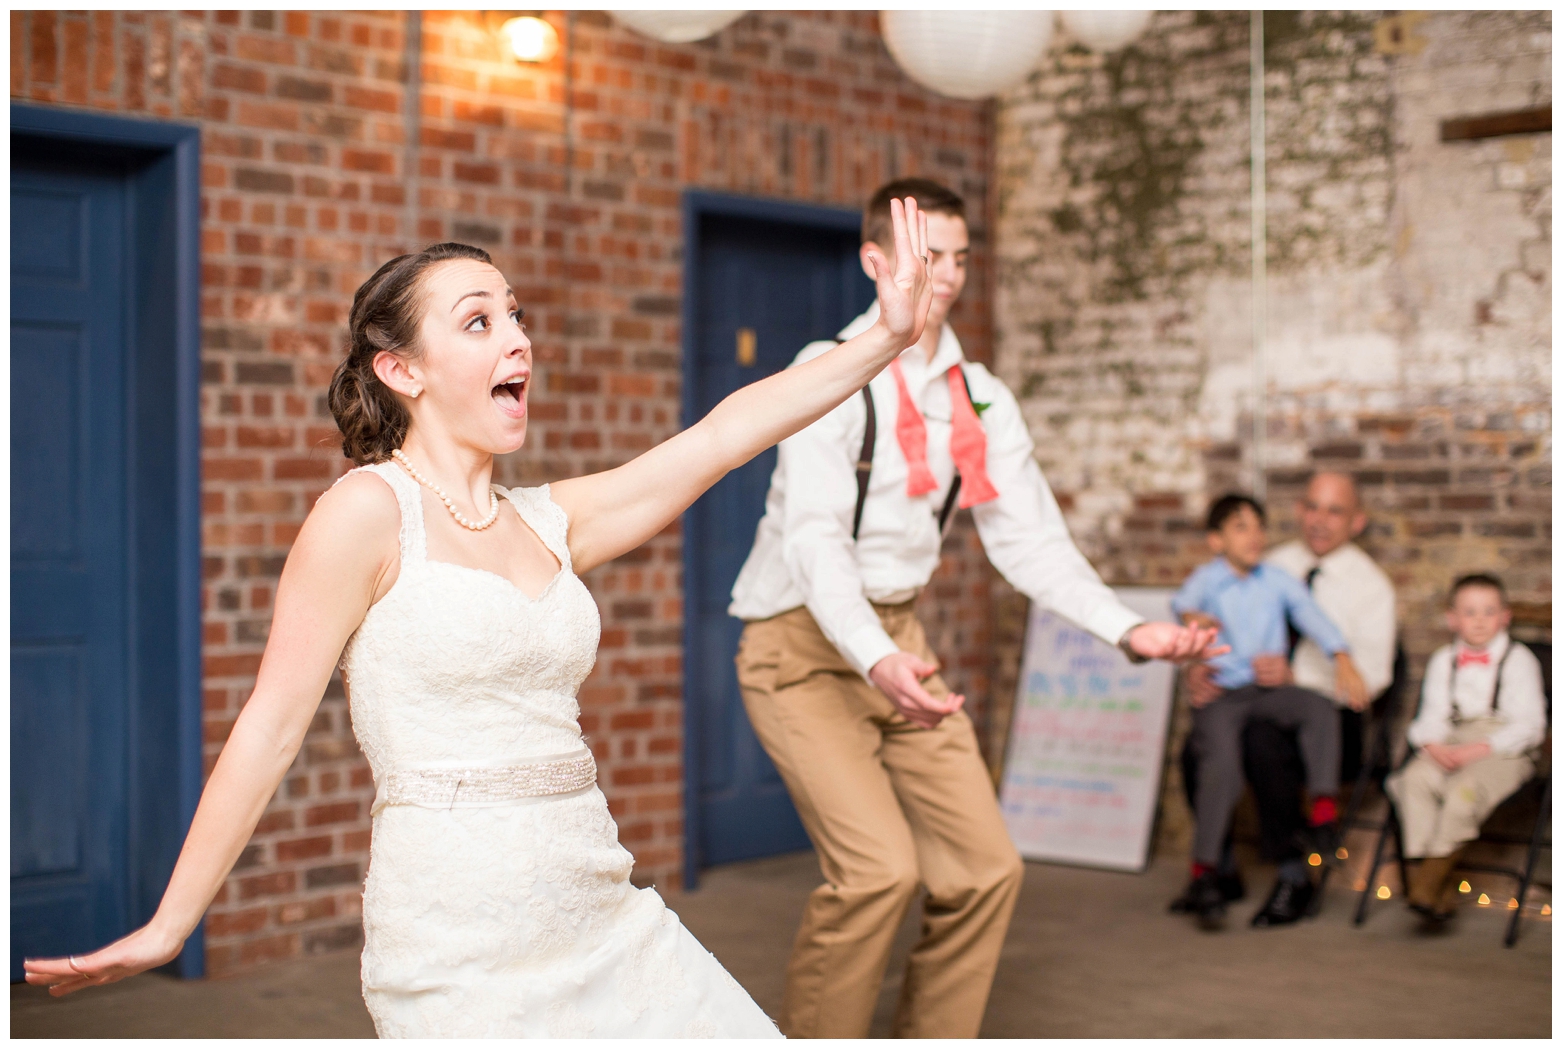 View More: http://hopetaylorphotographyphotos.pass.us/kelsie-and-byron-wedding